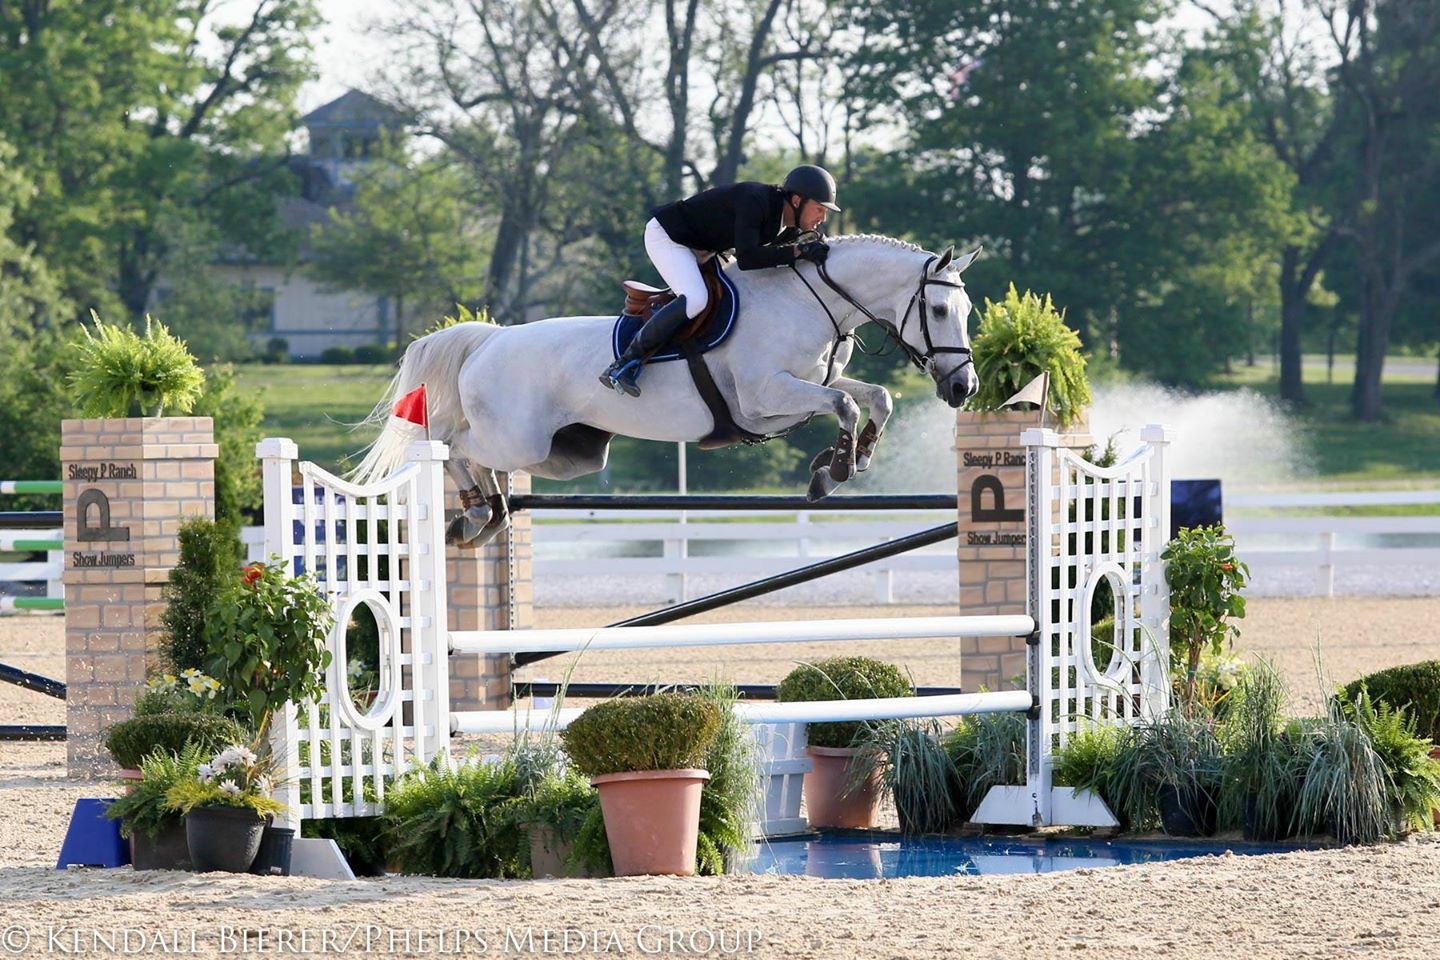 Chellana jumping in Lexington, KY. Photo: Kendall Bierer/Phelps Media Group